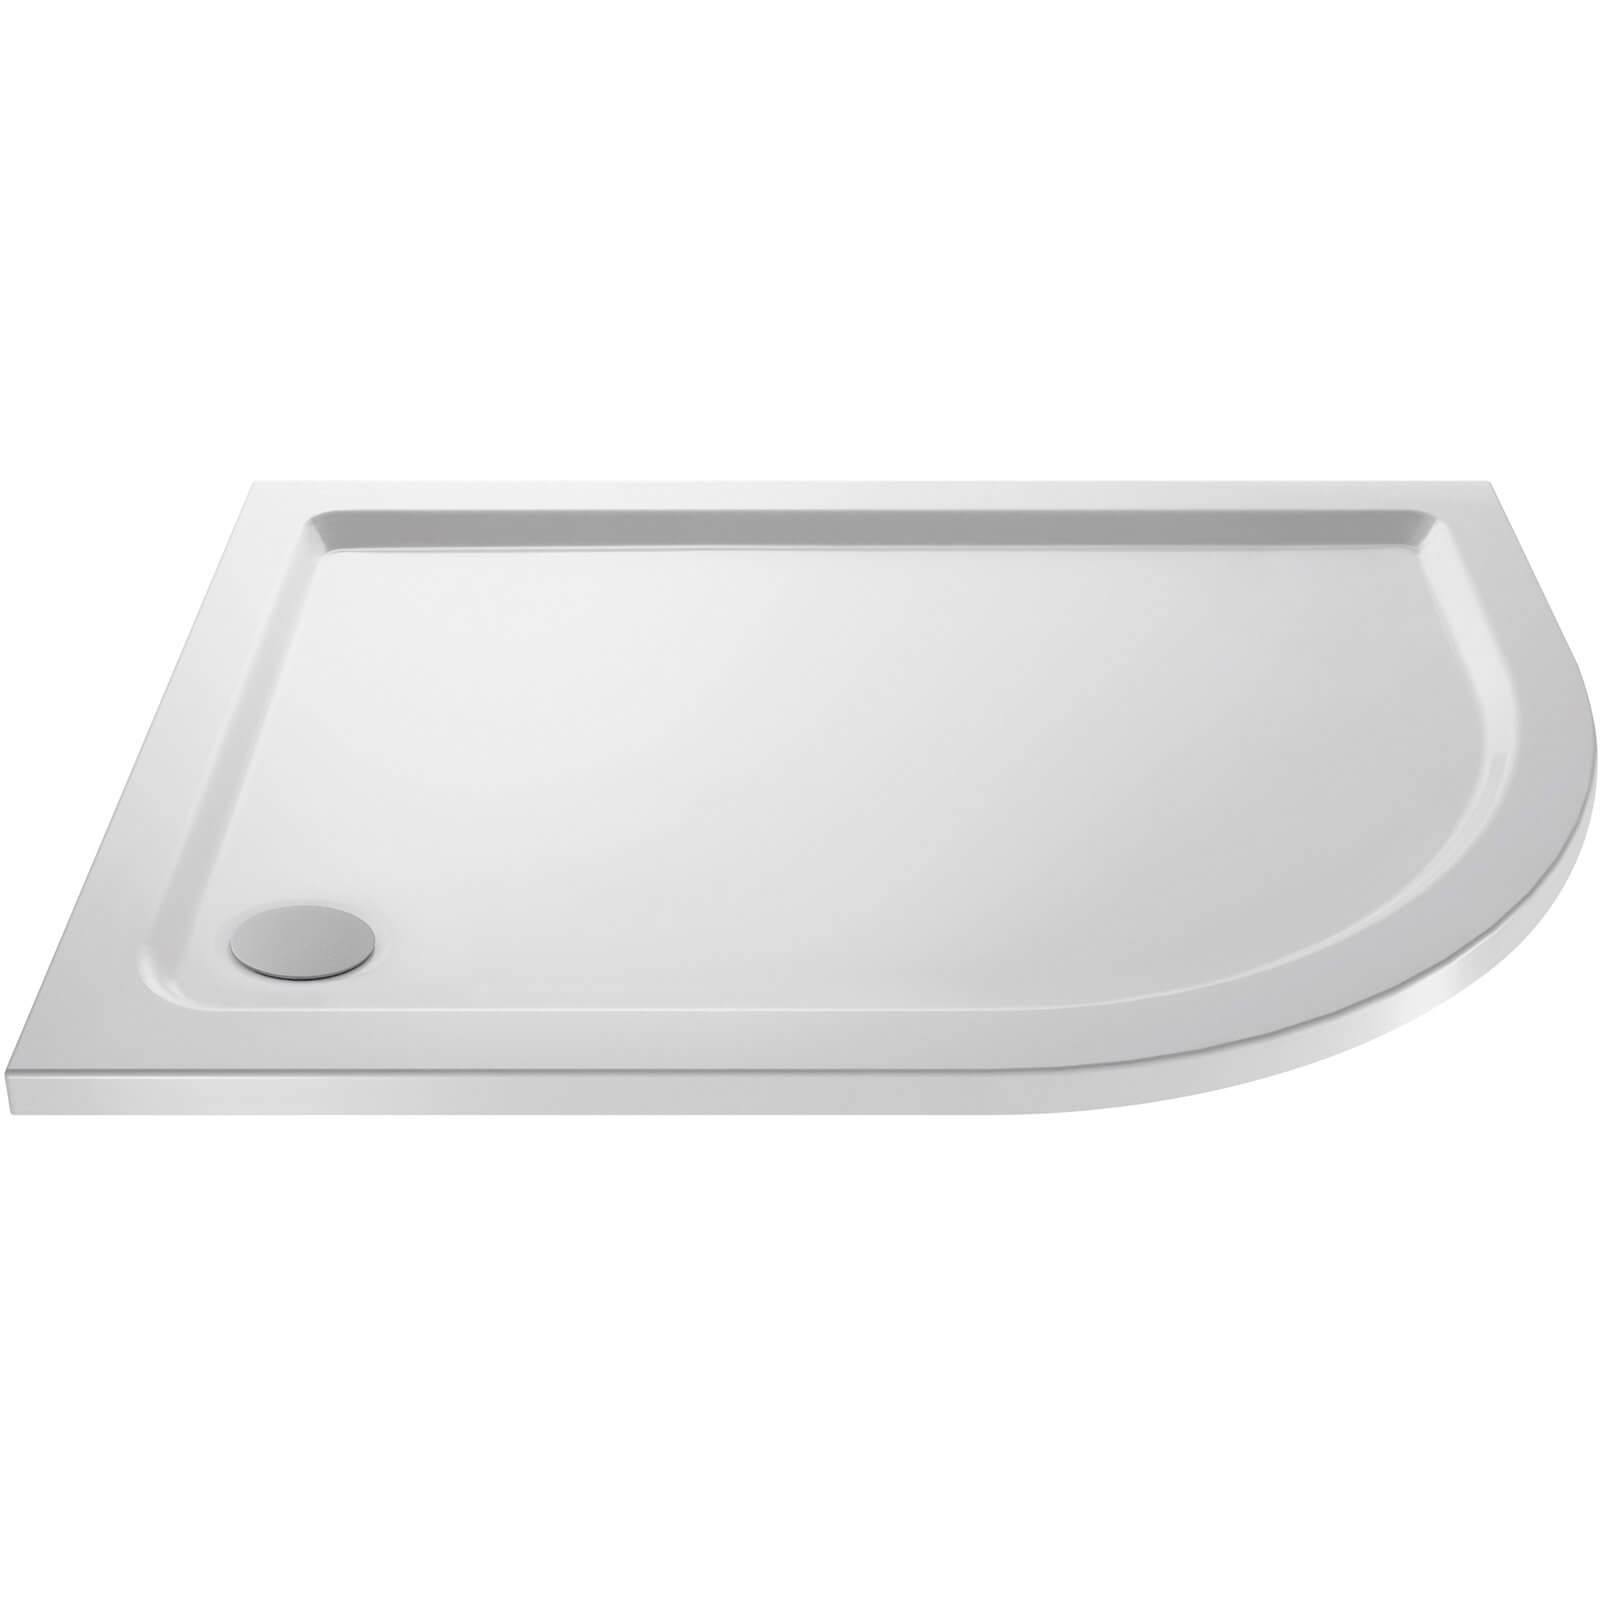 Photo of Balterley Right Hand Offset Quadrant Shower Tray - 900 X 760mm